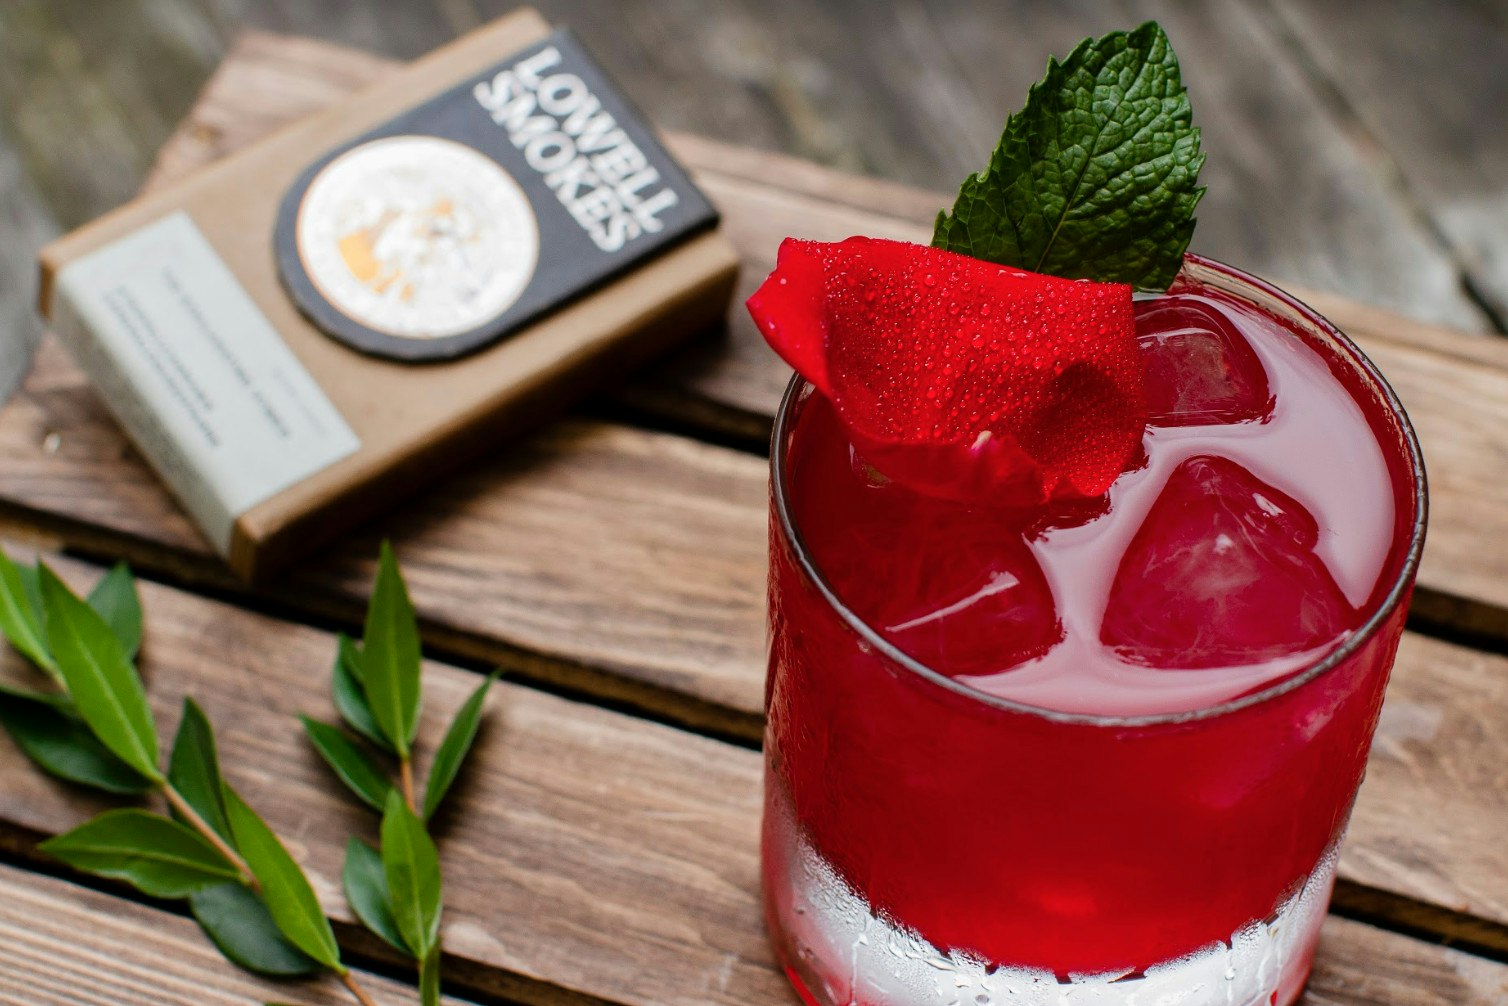 A red-coloured cocktail, decorated with a rose petal, and a pack of Lowell Smokes in the background